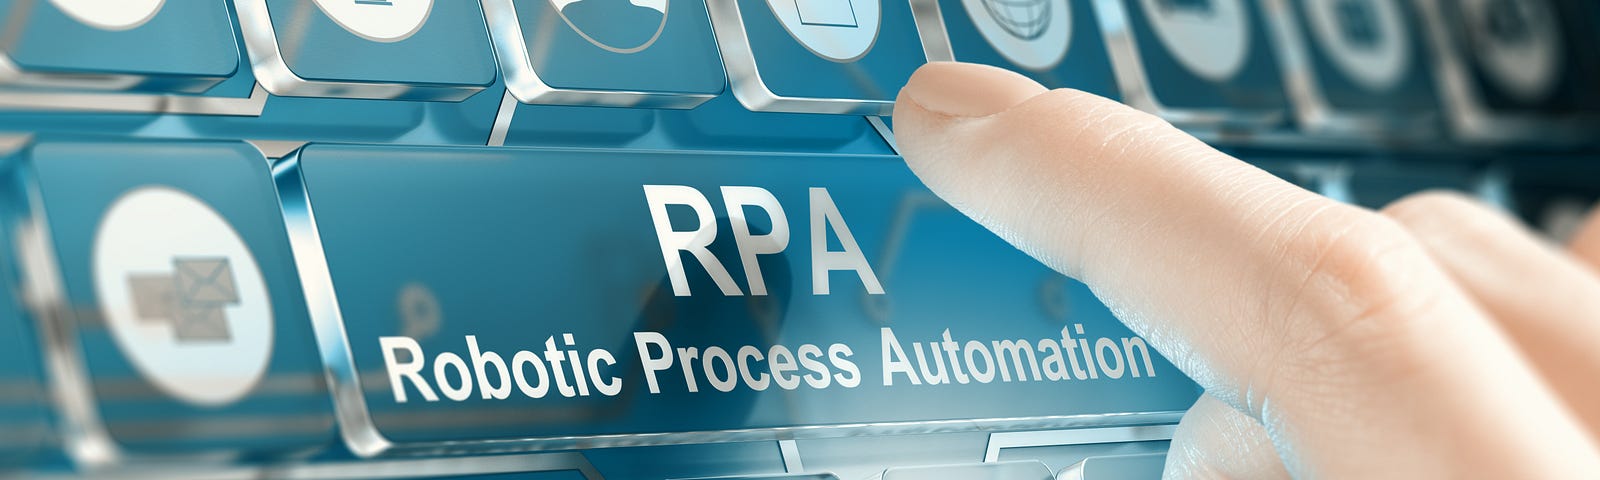 A blue computer keyboard zoomed in with different, tech-related keys (i.e. a cell phone, tool icon, a graph, etc.) and a large button in the center that says “Robotic Process Automation.”